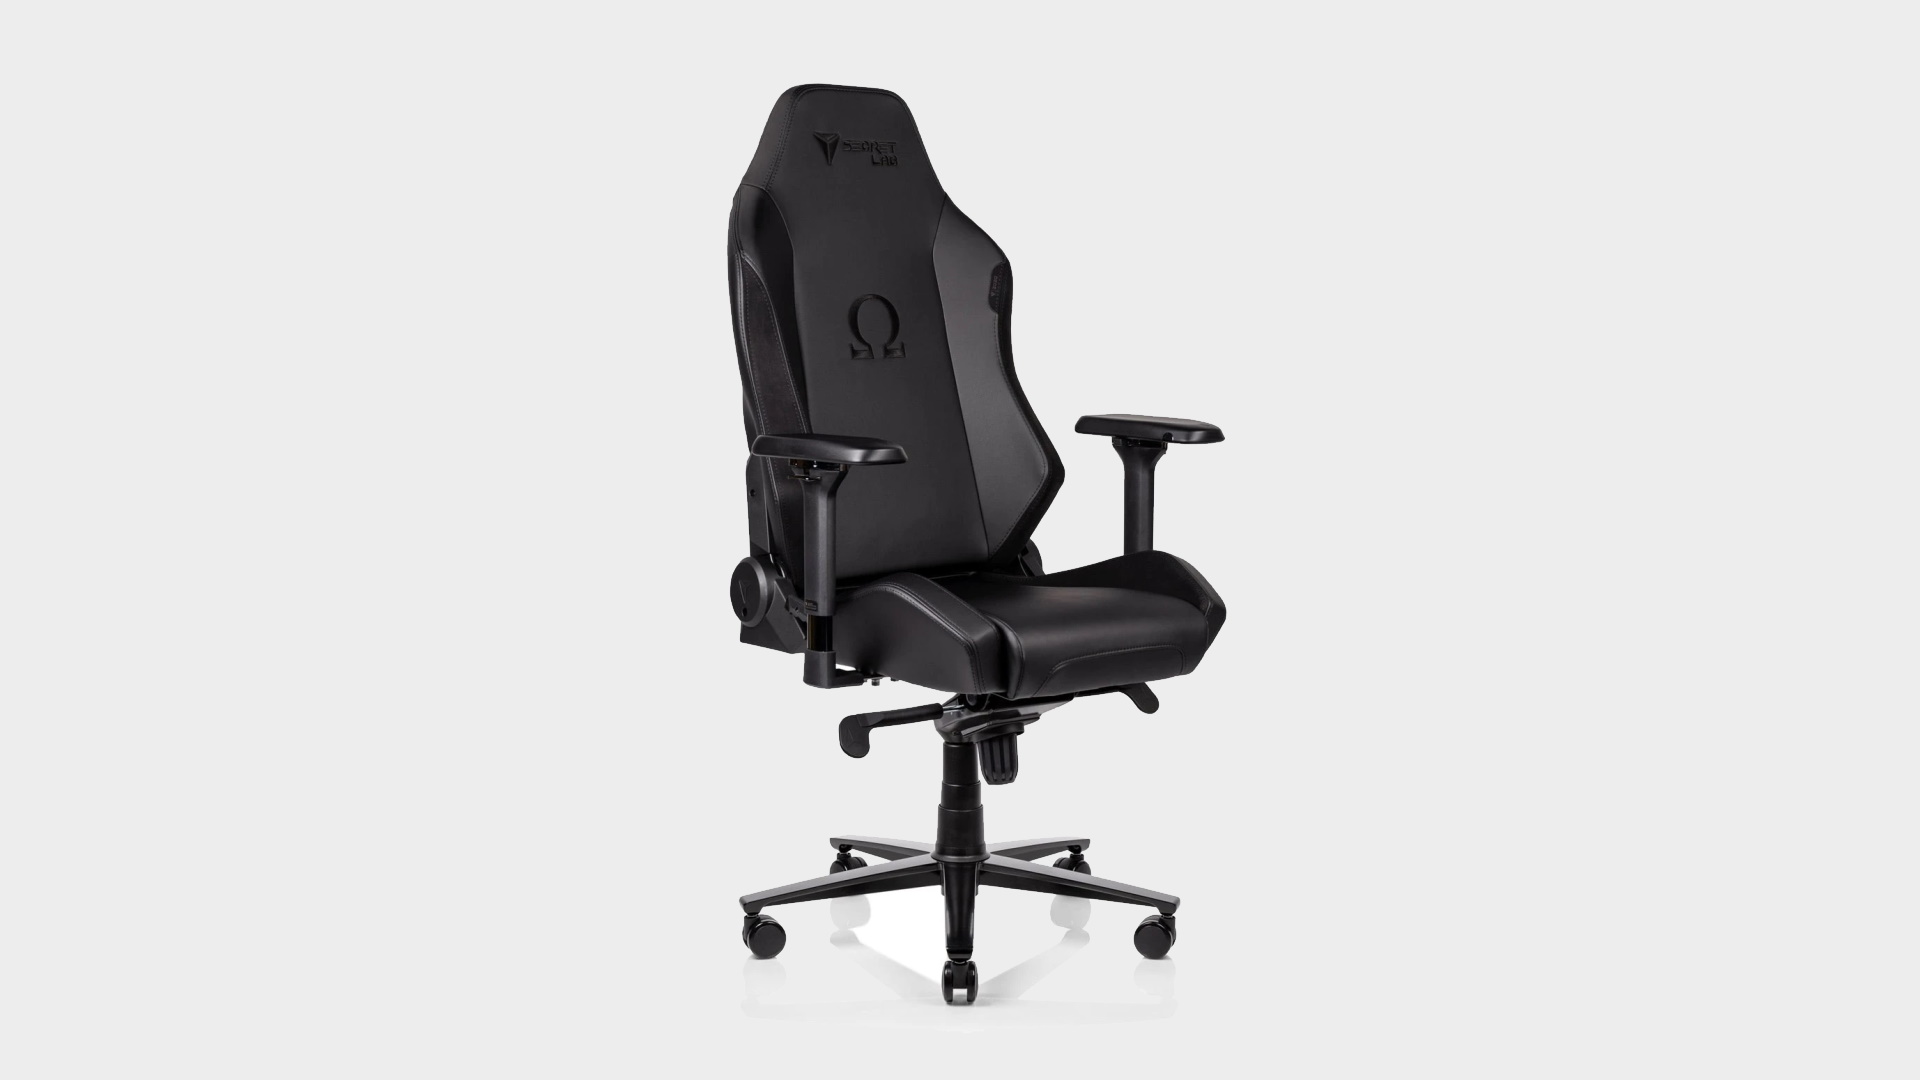 Secretlab OMEGA 2020 Series gaming chair on a grey background.